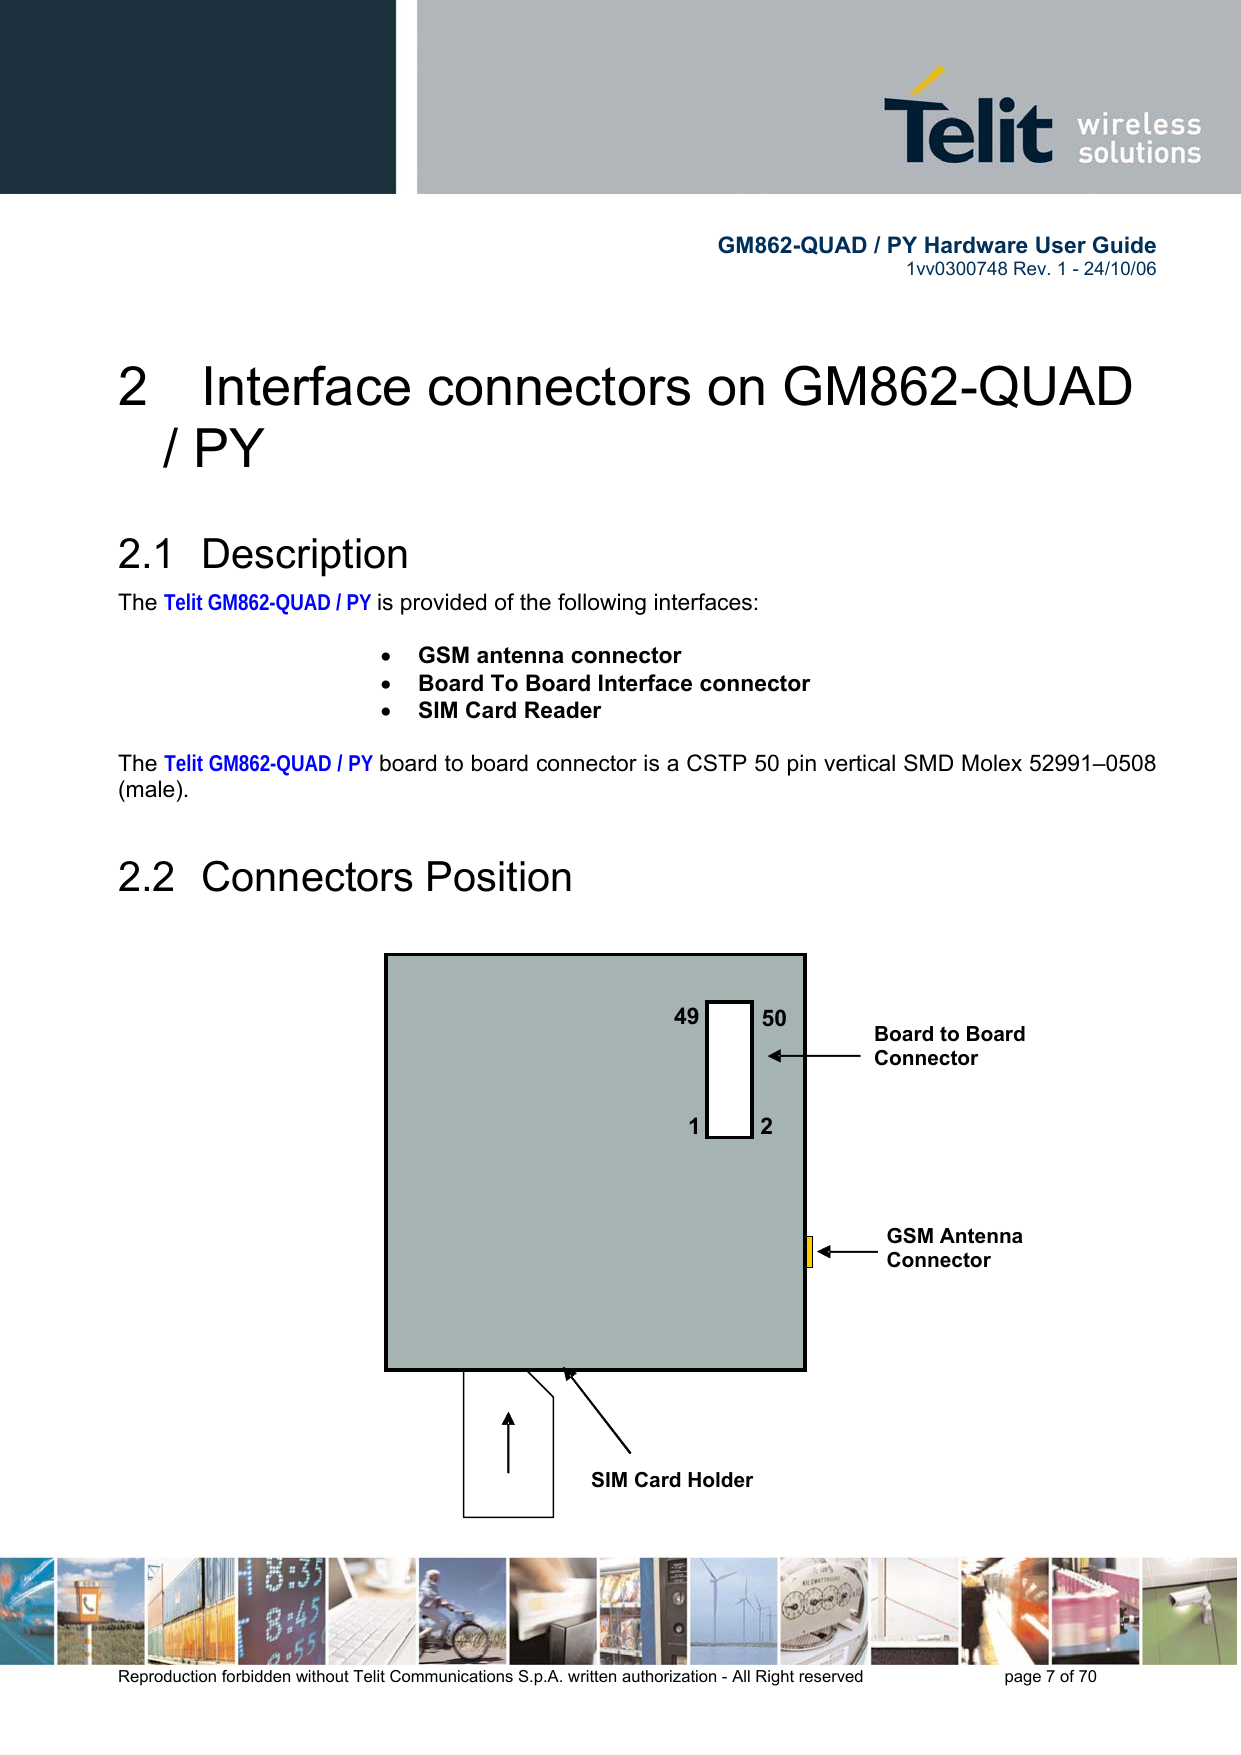        GM862-QUAD / PY Hardware User Guide   1vv0300748 Rev. 1 - 24/10/06    Reproduction forbidden without Telit Communications S.p.A. written authorization - All Right reserved    page 7 of 70  2  Interface connectors on GM862-QUAD / PY 2.1 Description The Telit GM862-QUAD / PY is provided of the following interfaces:  •  GSM antenna connector  •  Board To Board Interface connector •  SIM Card Reader   The Telit GM862-QUAD / PY board to board connector is a CSTP 50 pin vertical SMD Molex 52991–0508 (male).  2.2 Connectors Position                                                                                   49 50 1 2 GSM Antenna  Connector Board to Board  Connector  SIM Card Holder 